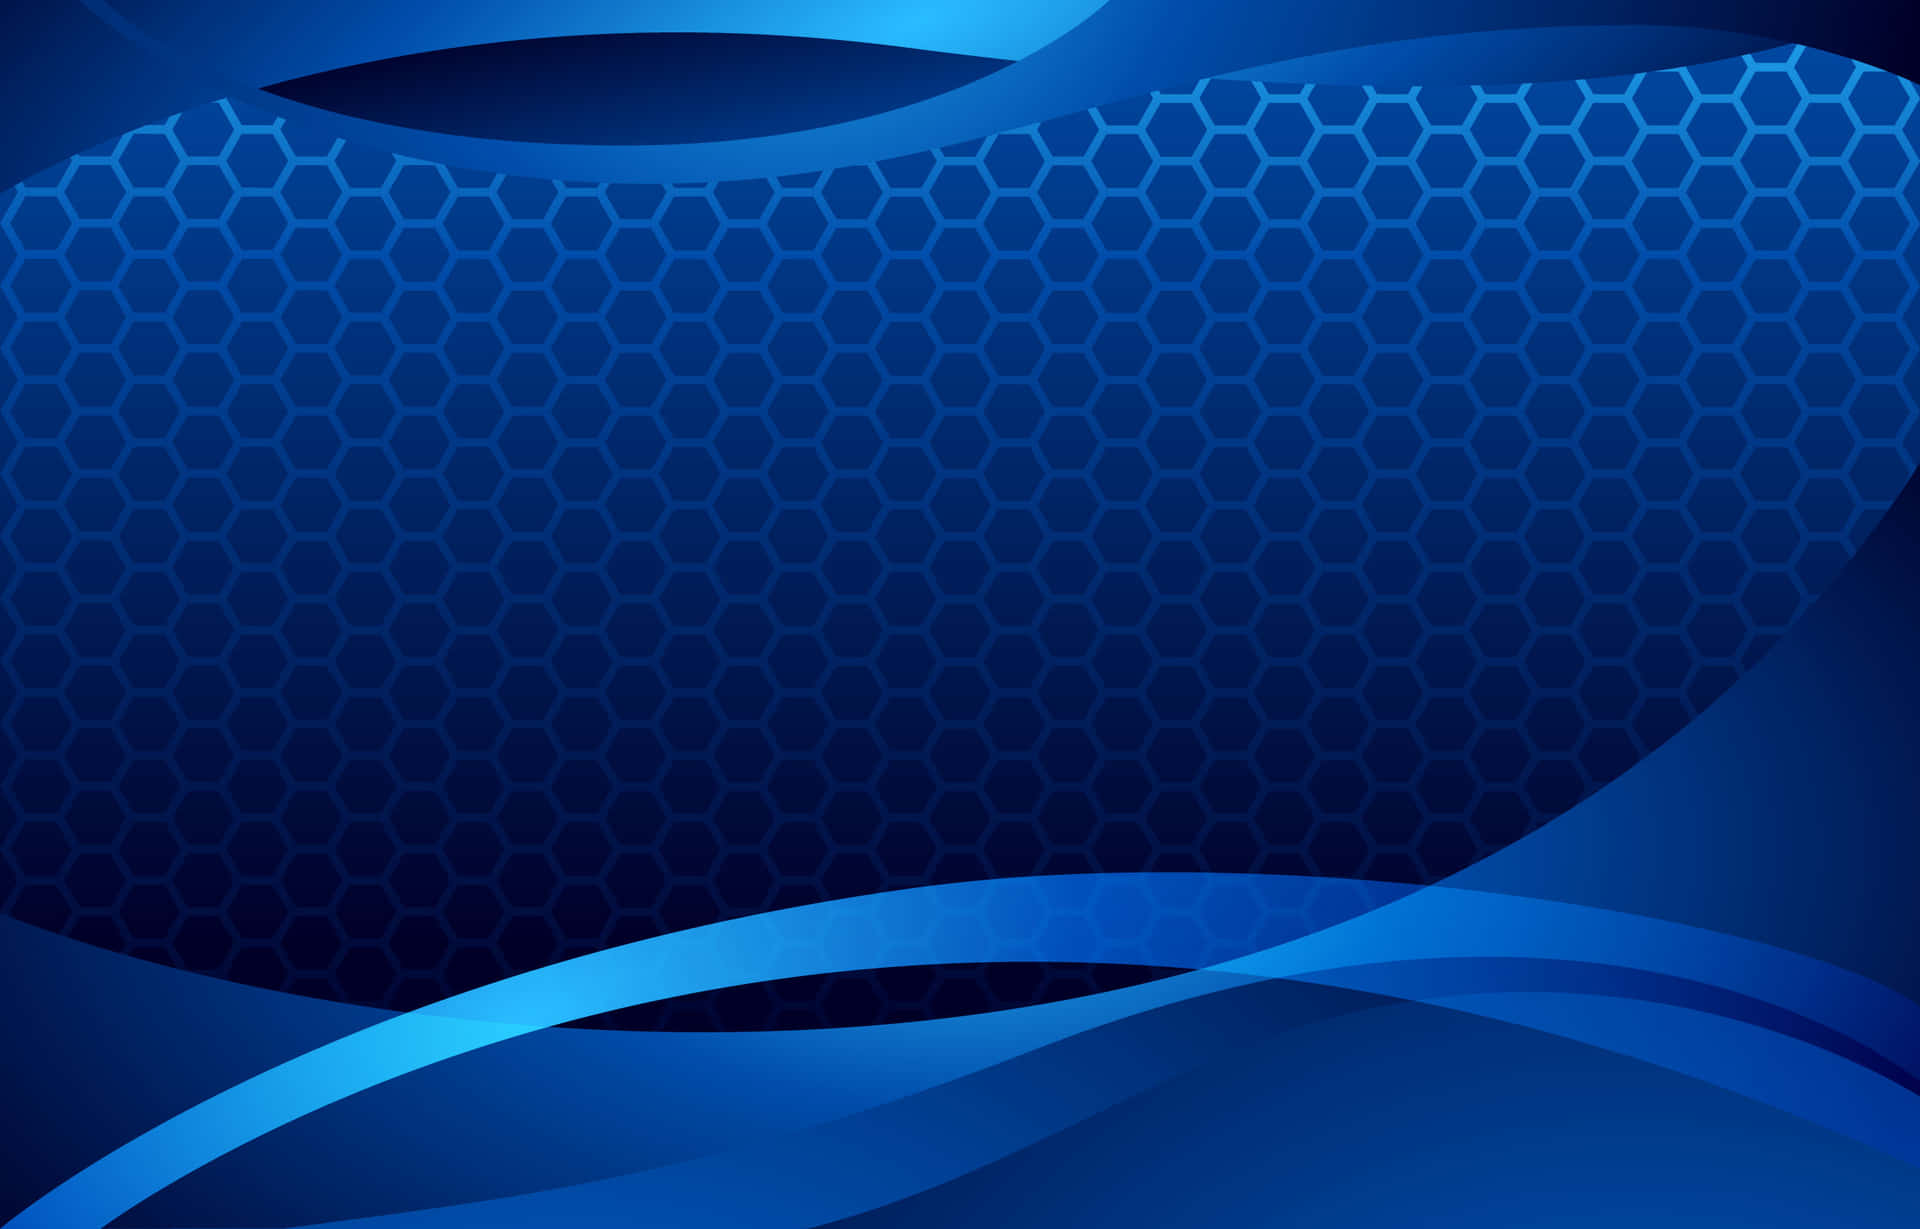 Blue Background With A Wave Pattern